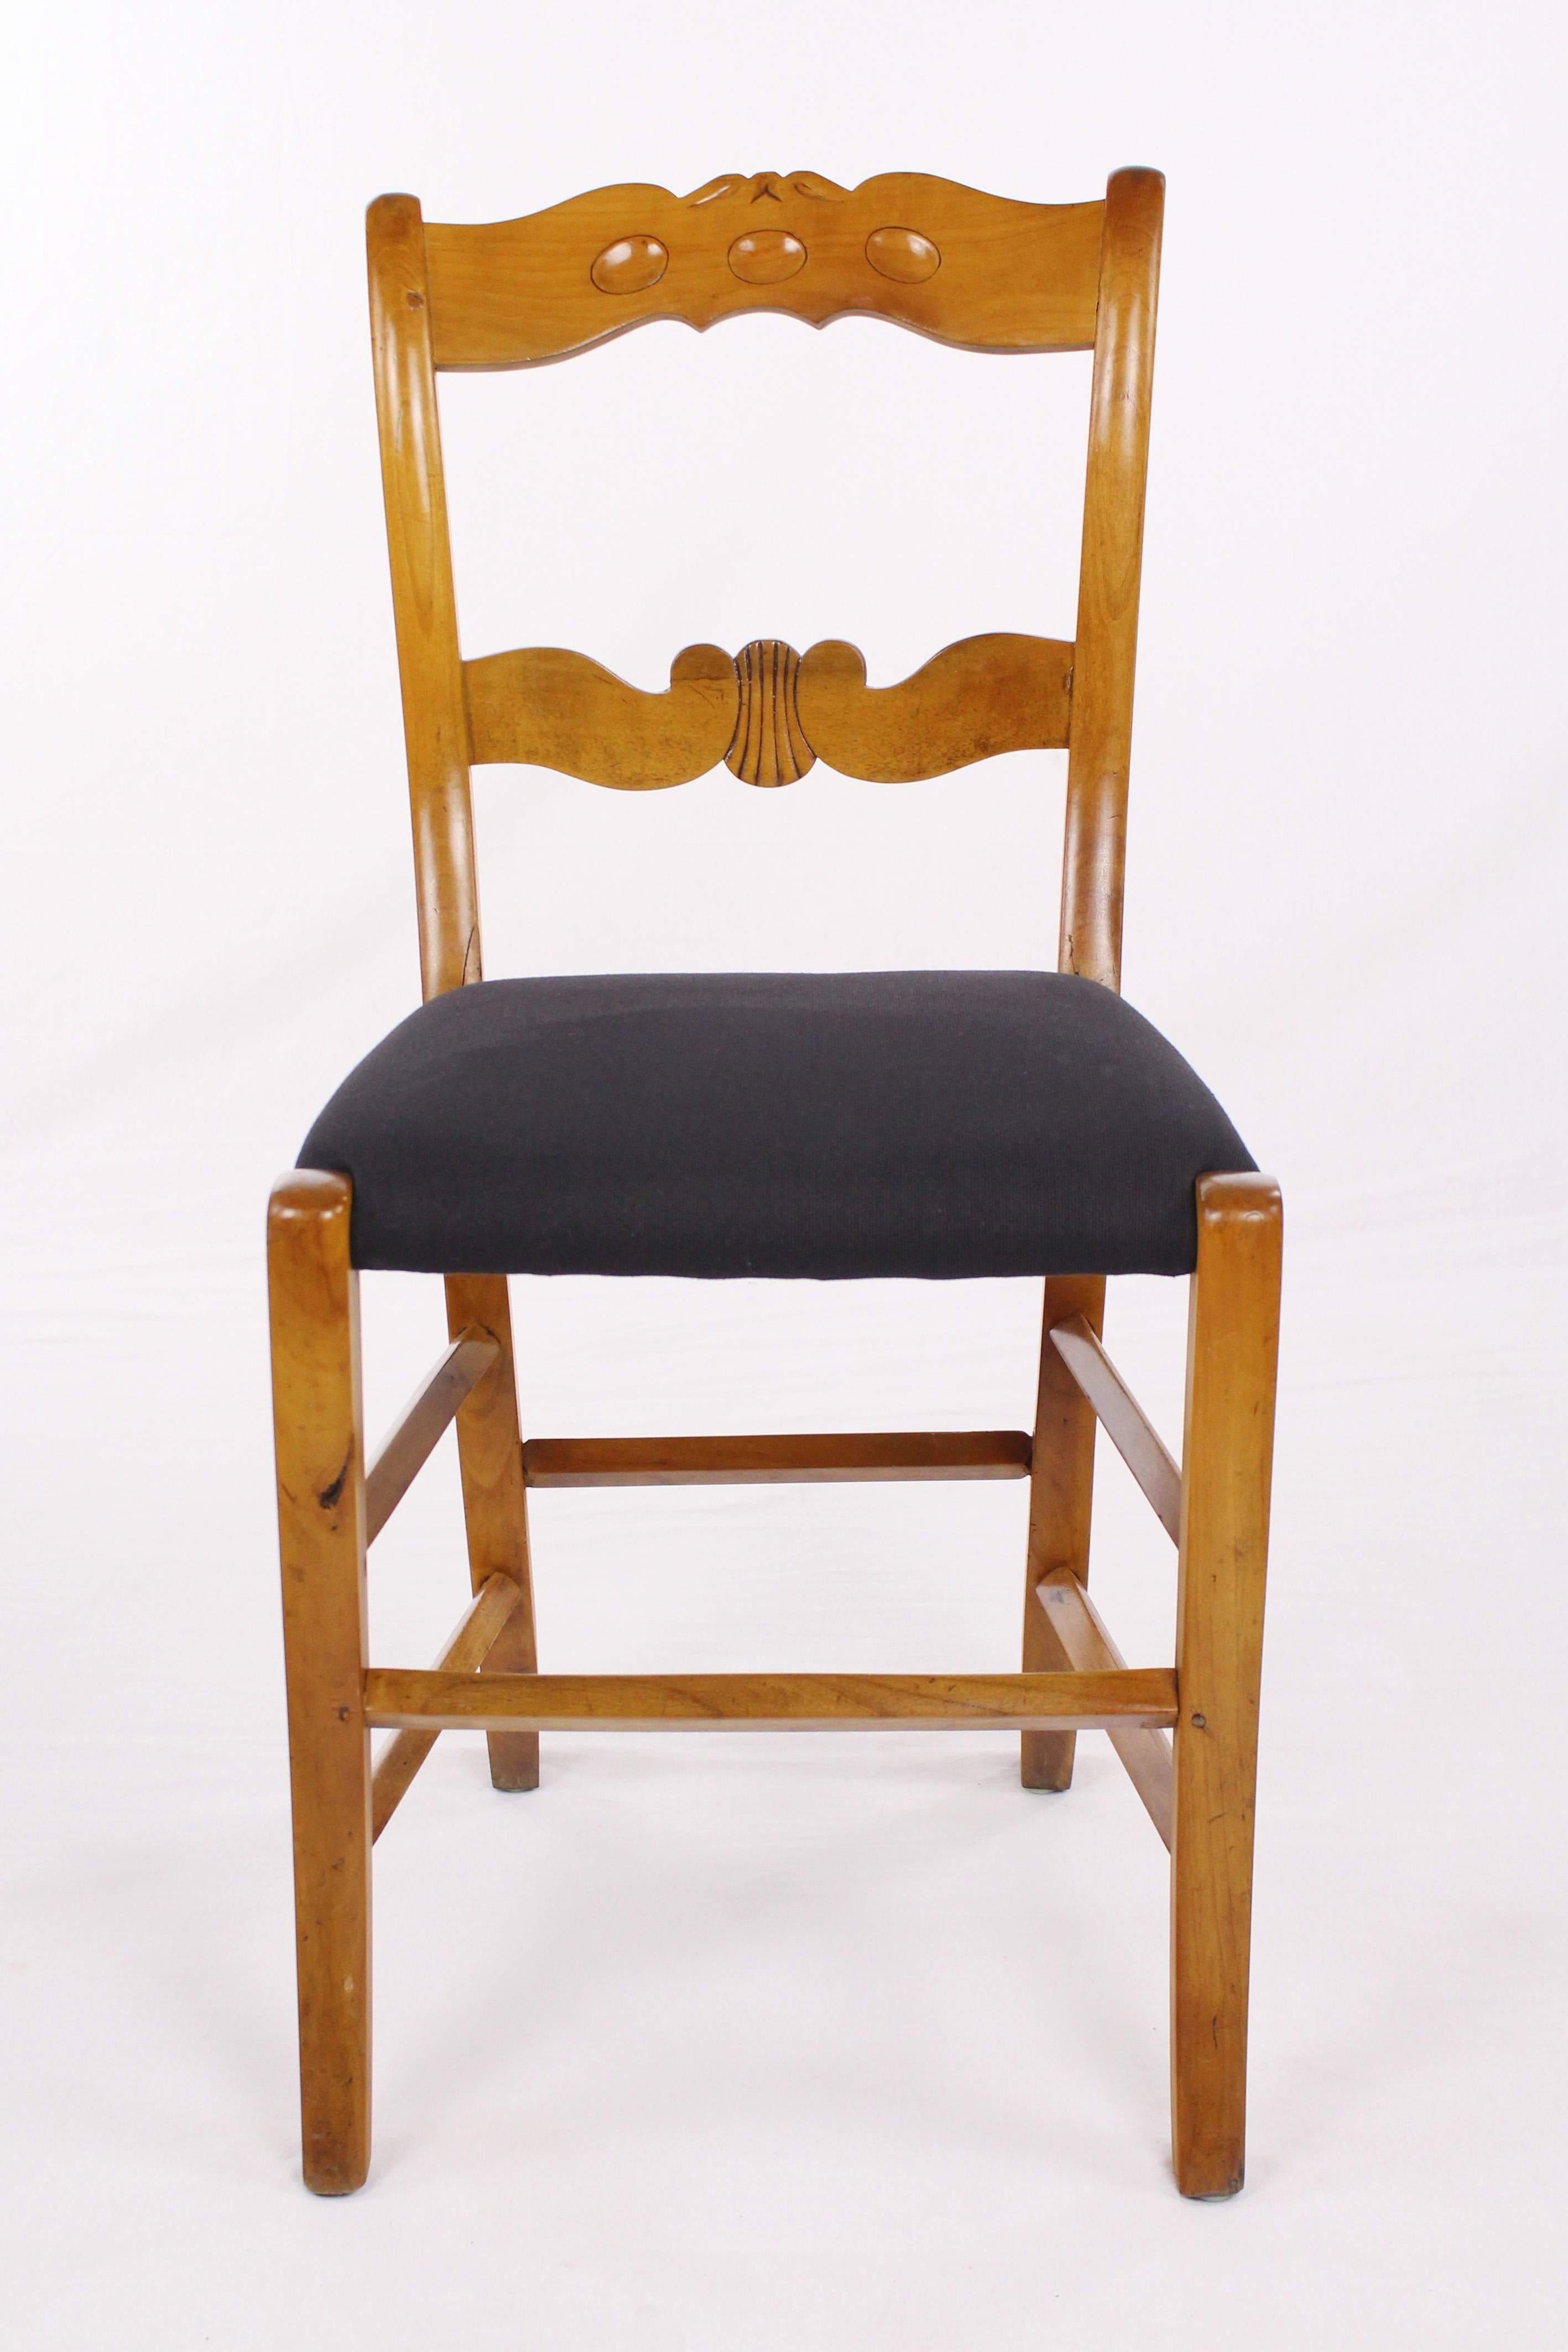 Set of 4 rustic Biedermeier Period Chairs, Germany circa 1830 Massive Cherrywood For Sale 3